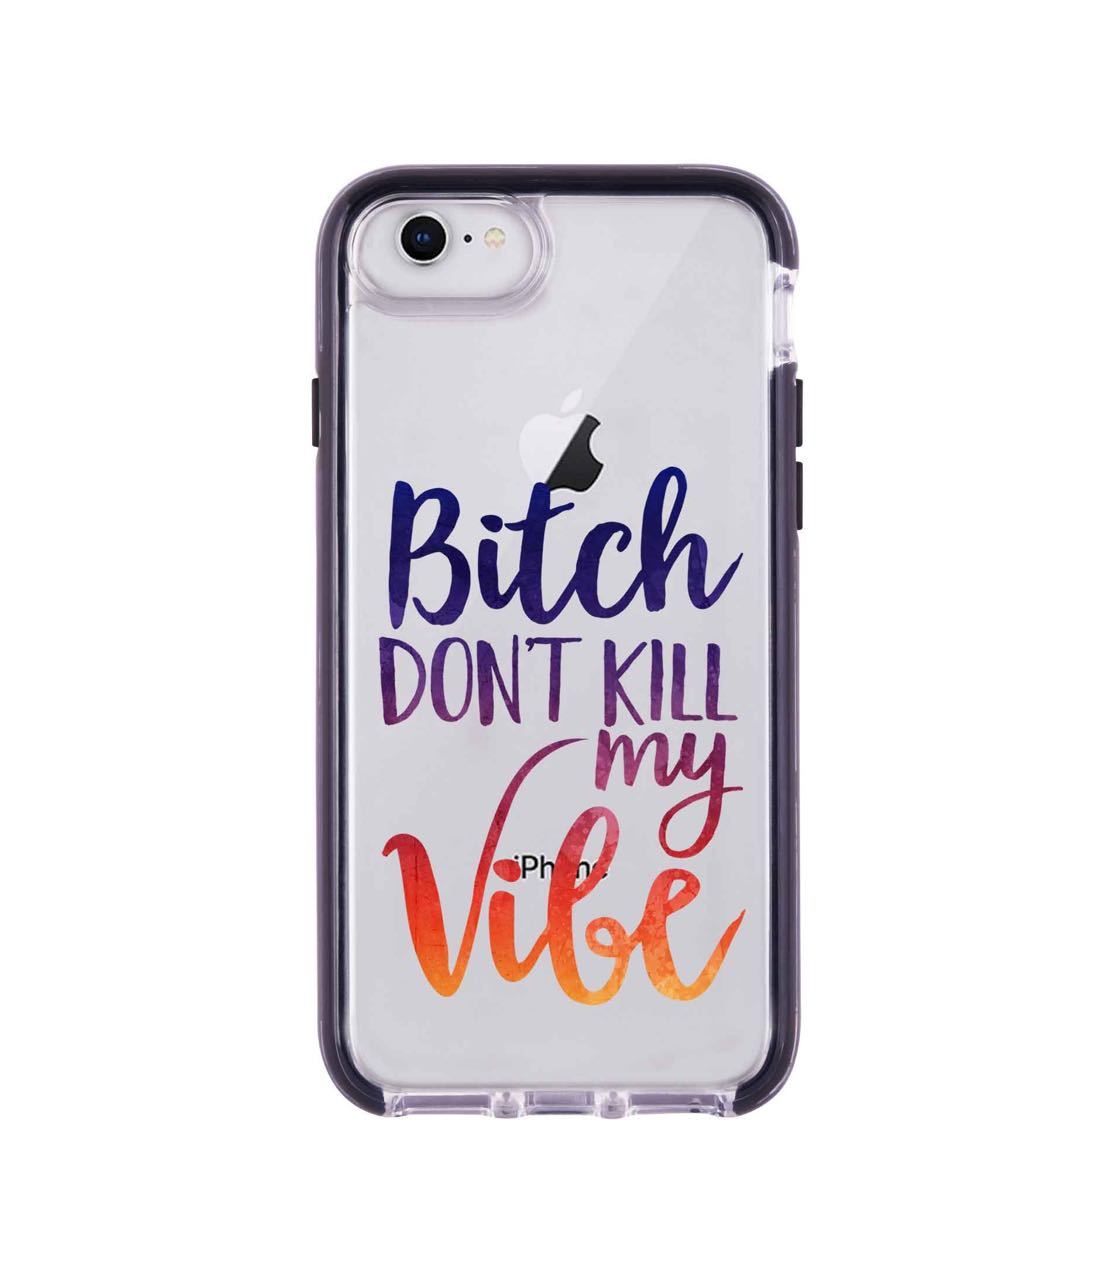 Dont kill my Vibe - Extreme Phone Case for iPhone SE (2020)